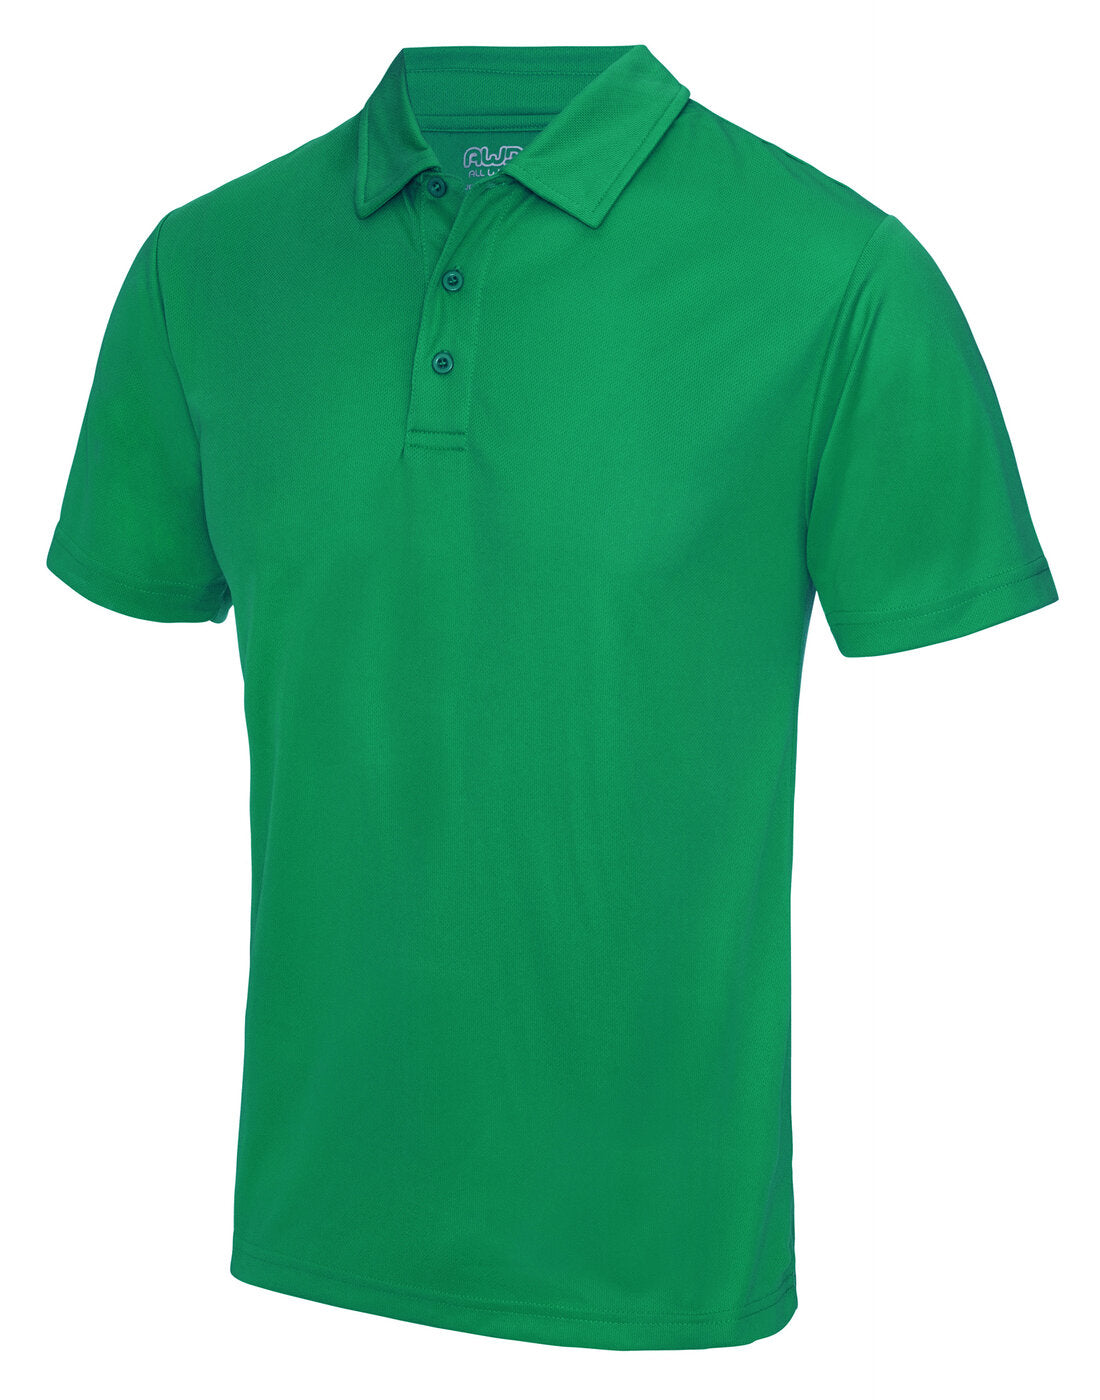 Just Cool By Awdis Cool Polo - JC040